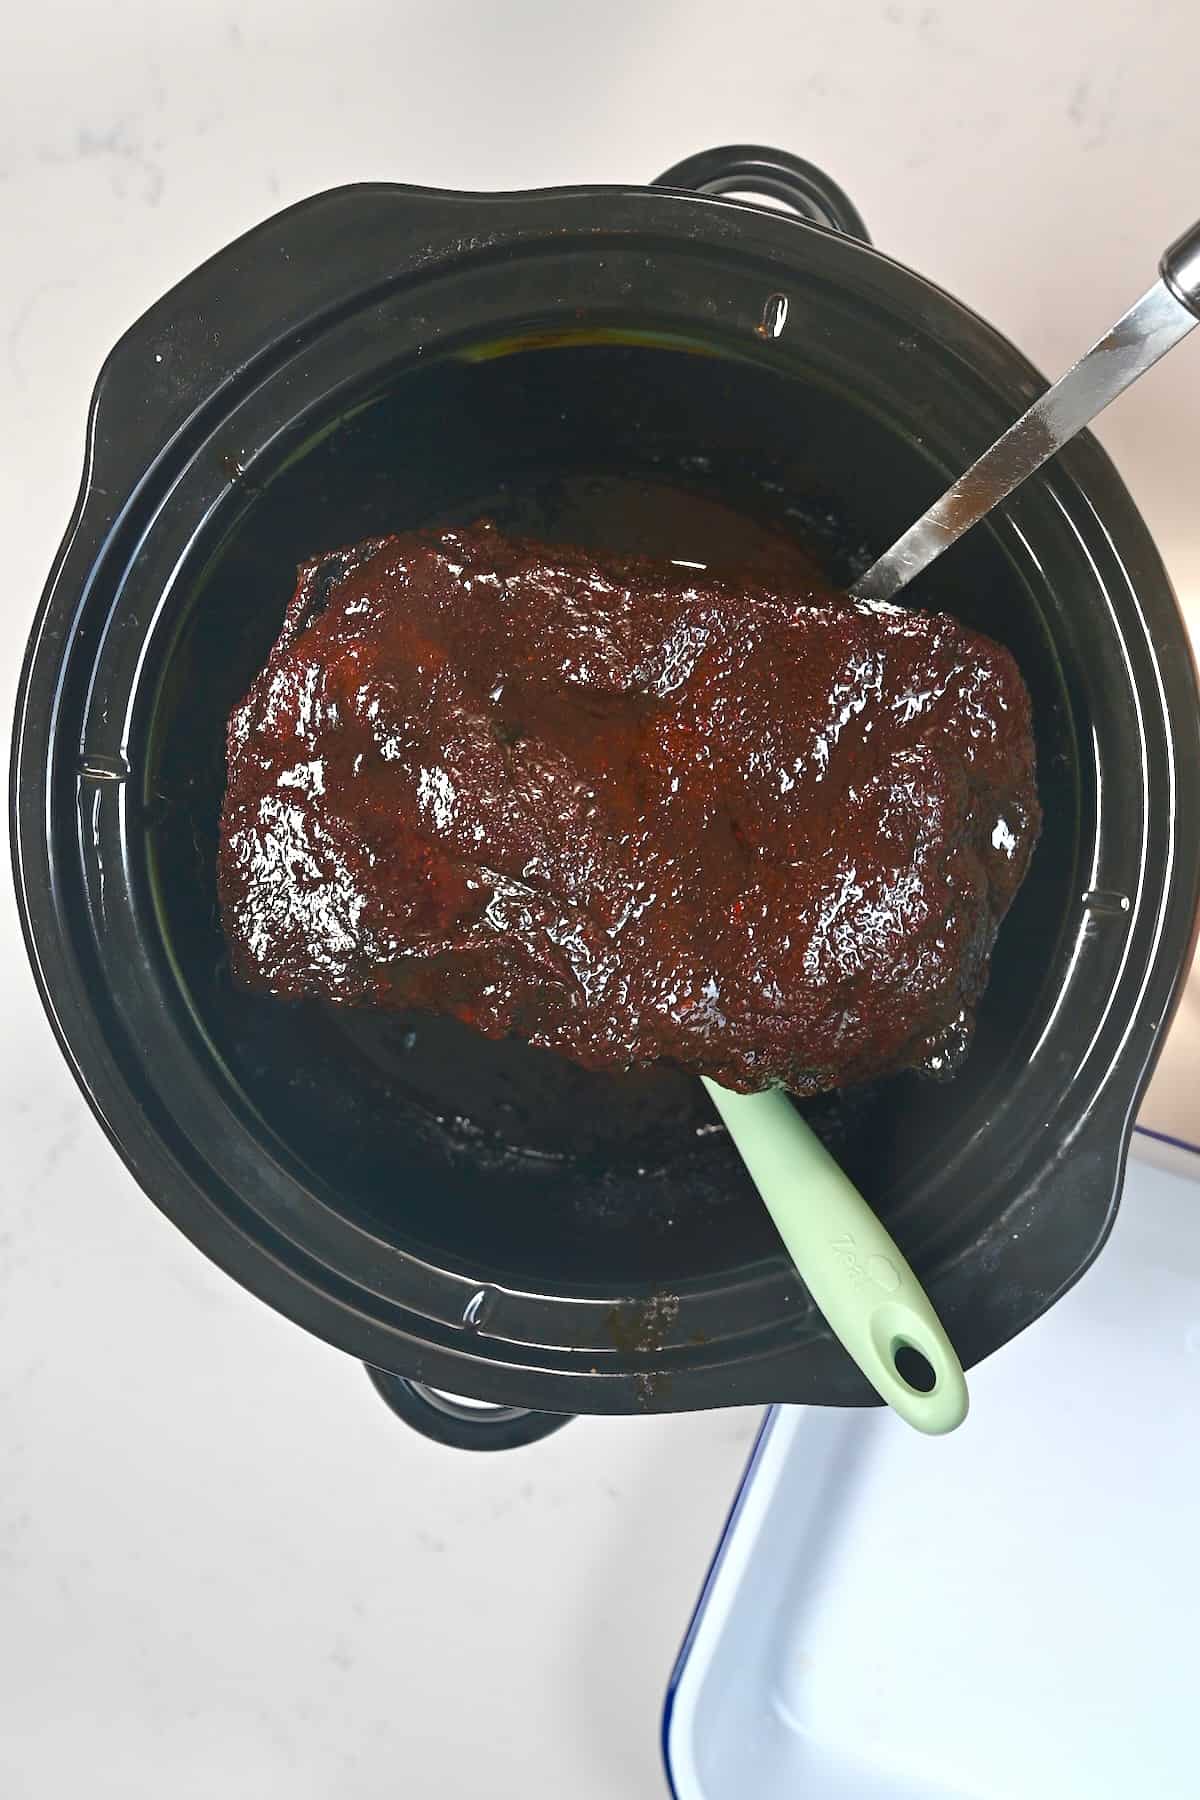 Beef brisket cooked in a slow cooker